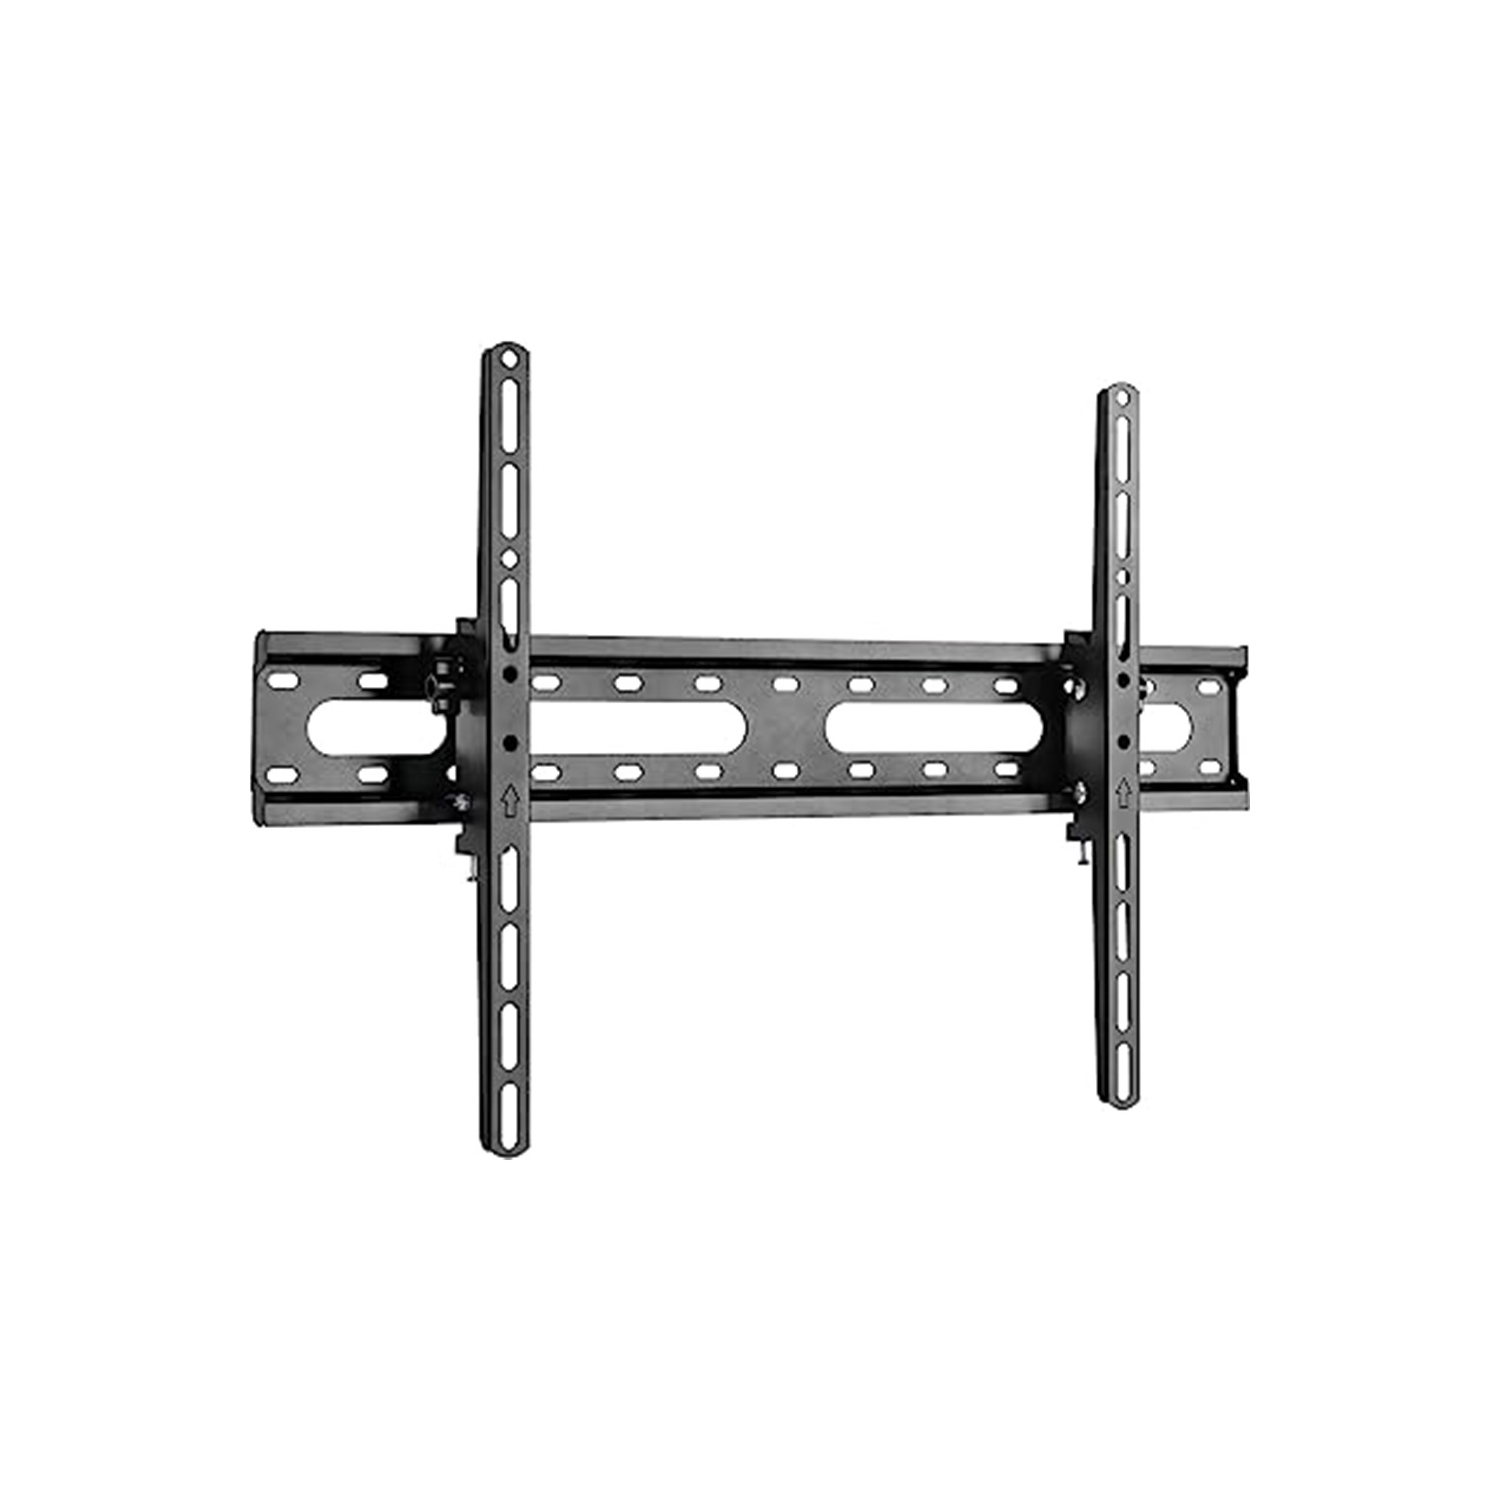 37-70 Inch TV Mounts Heavy Duty Tilting TV Wall Mount Bracket LED Plasma Flat Curved TVs holds up to 45kg/99lbs- PrimeCables